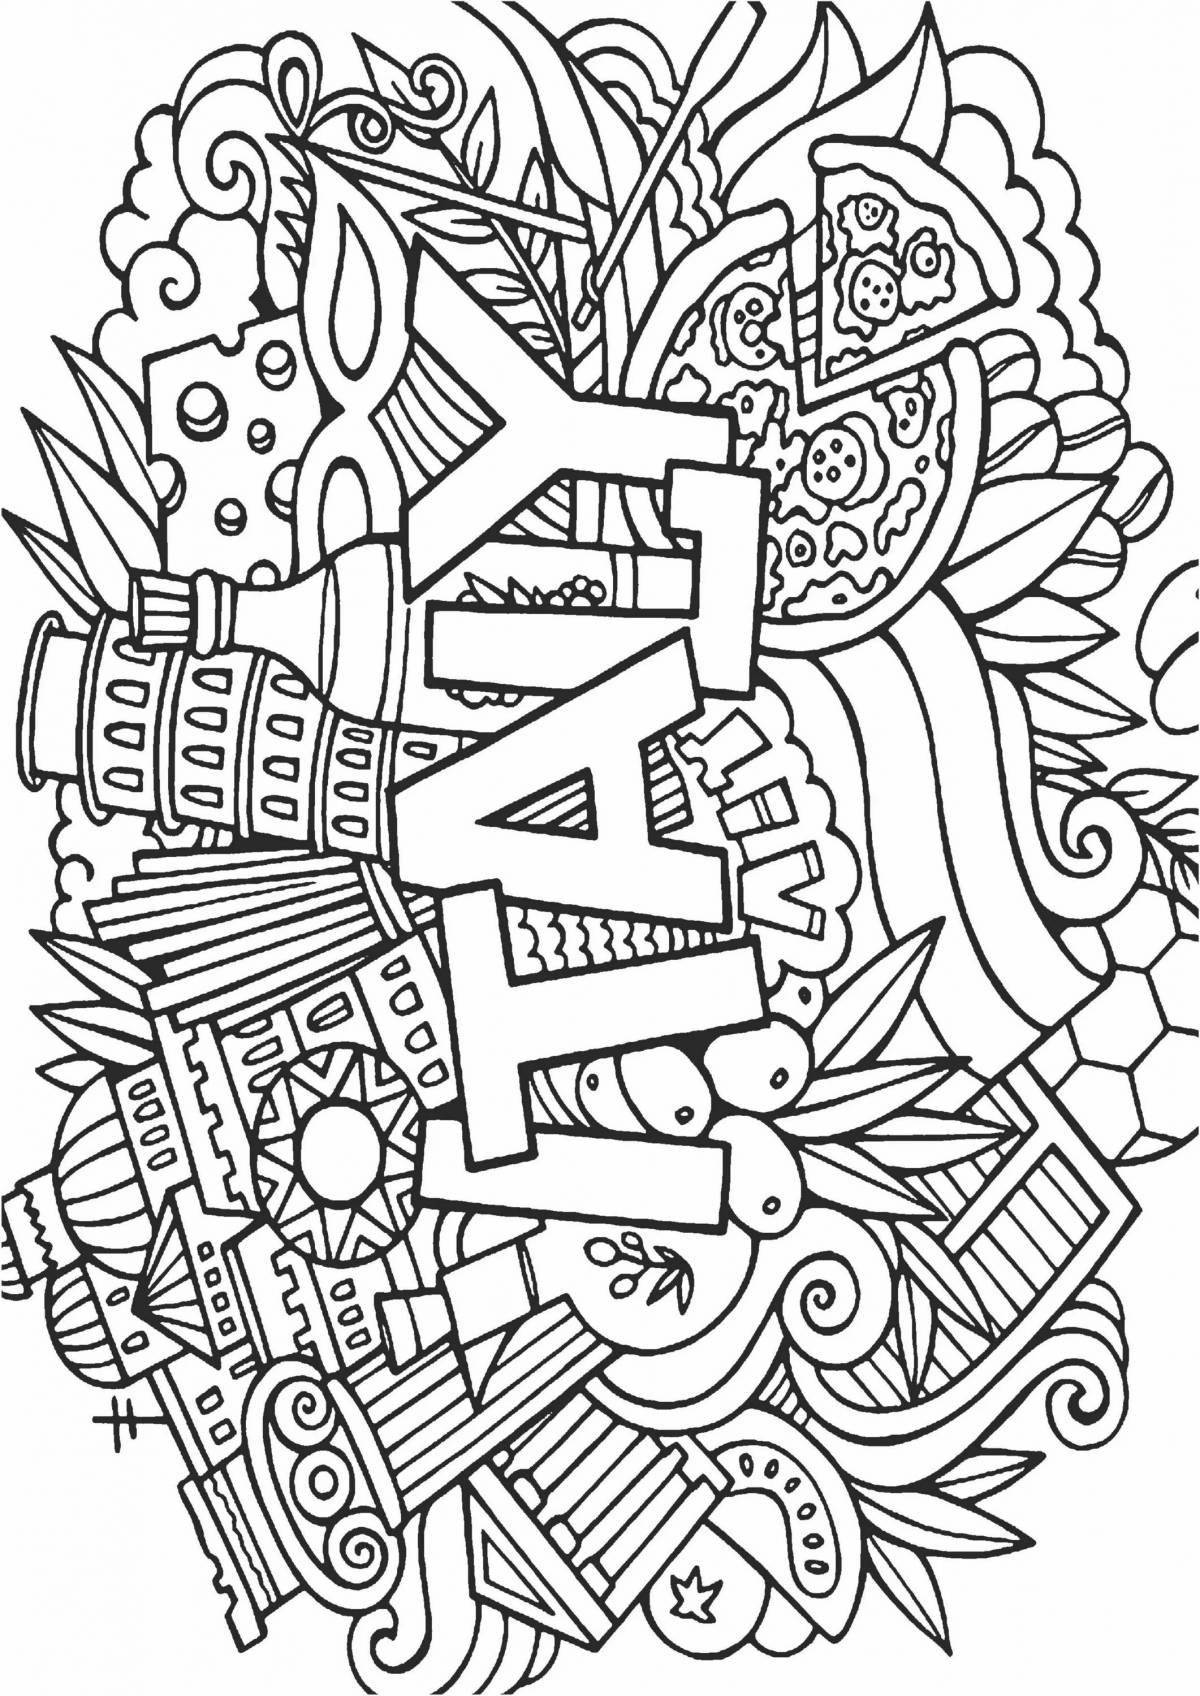 Cool adult coloring book